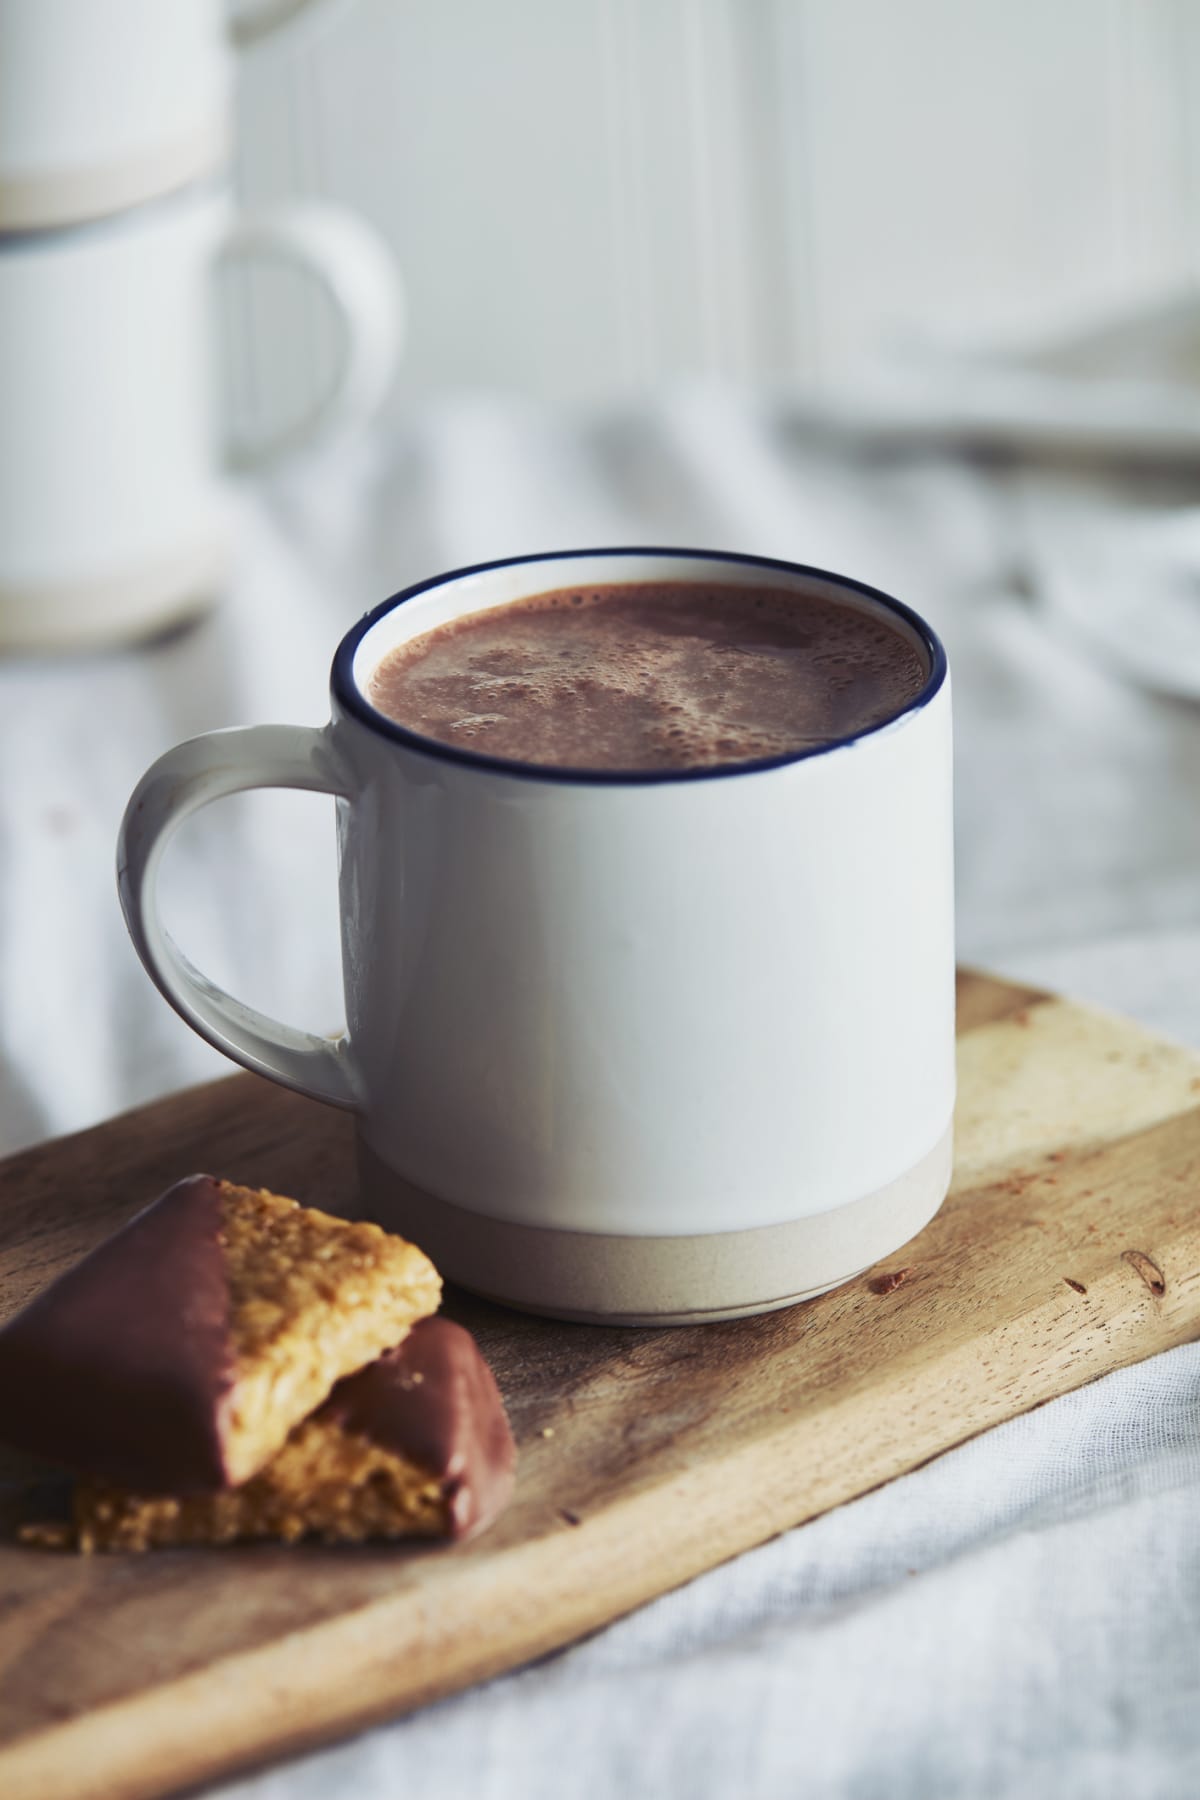 Hot chocolate in a mug on a tray with some type of pastry